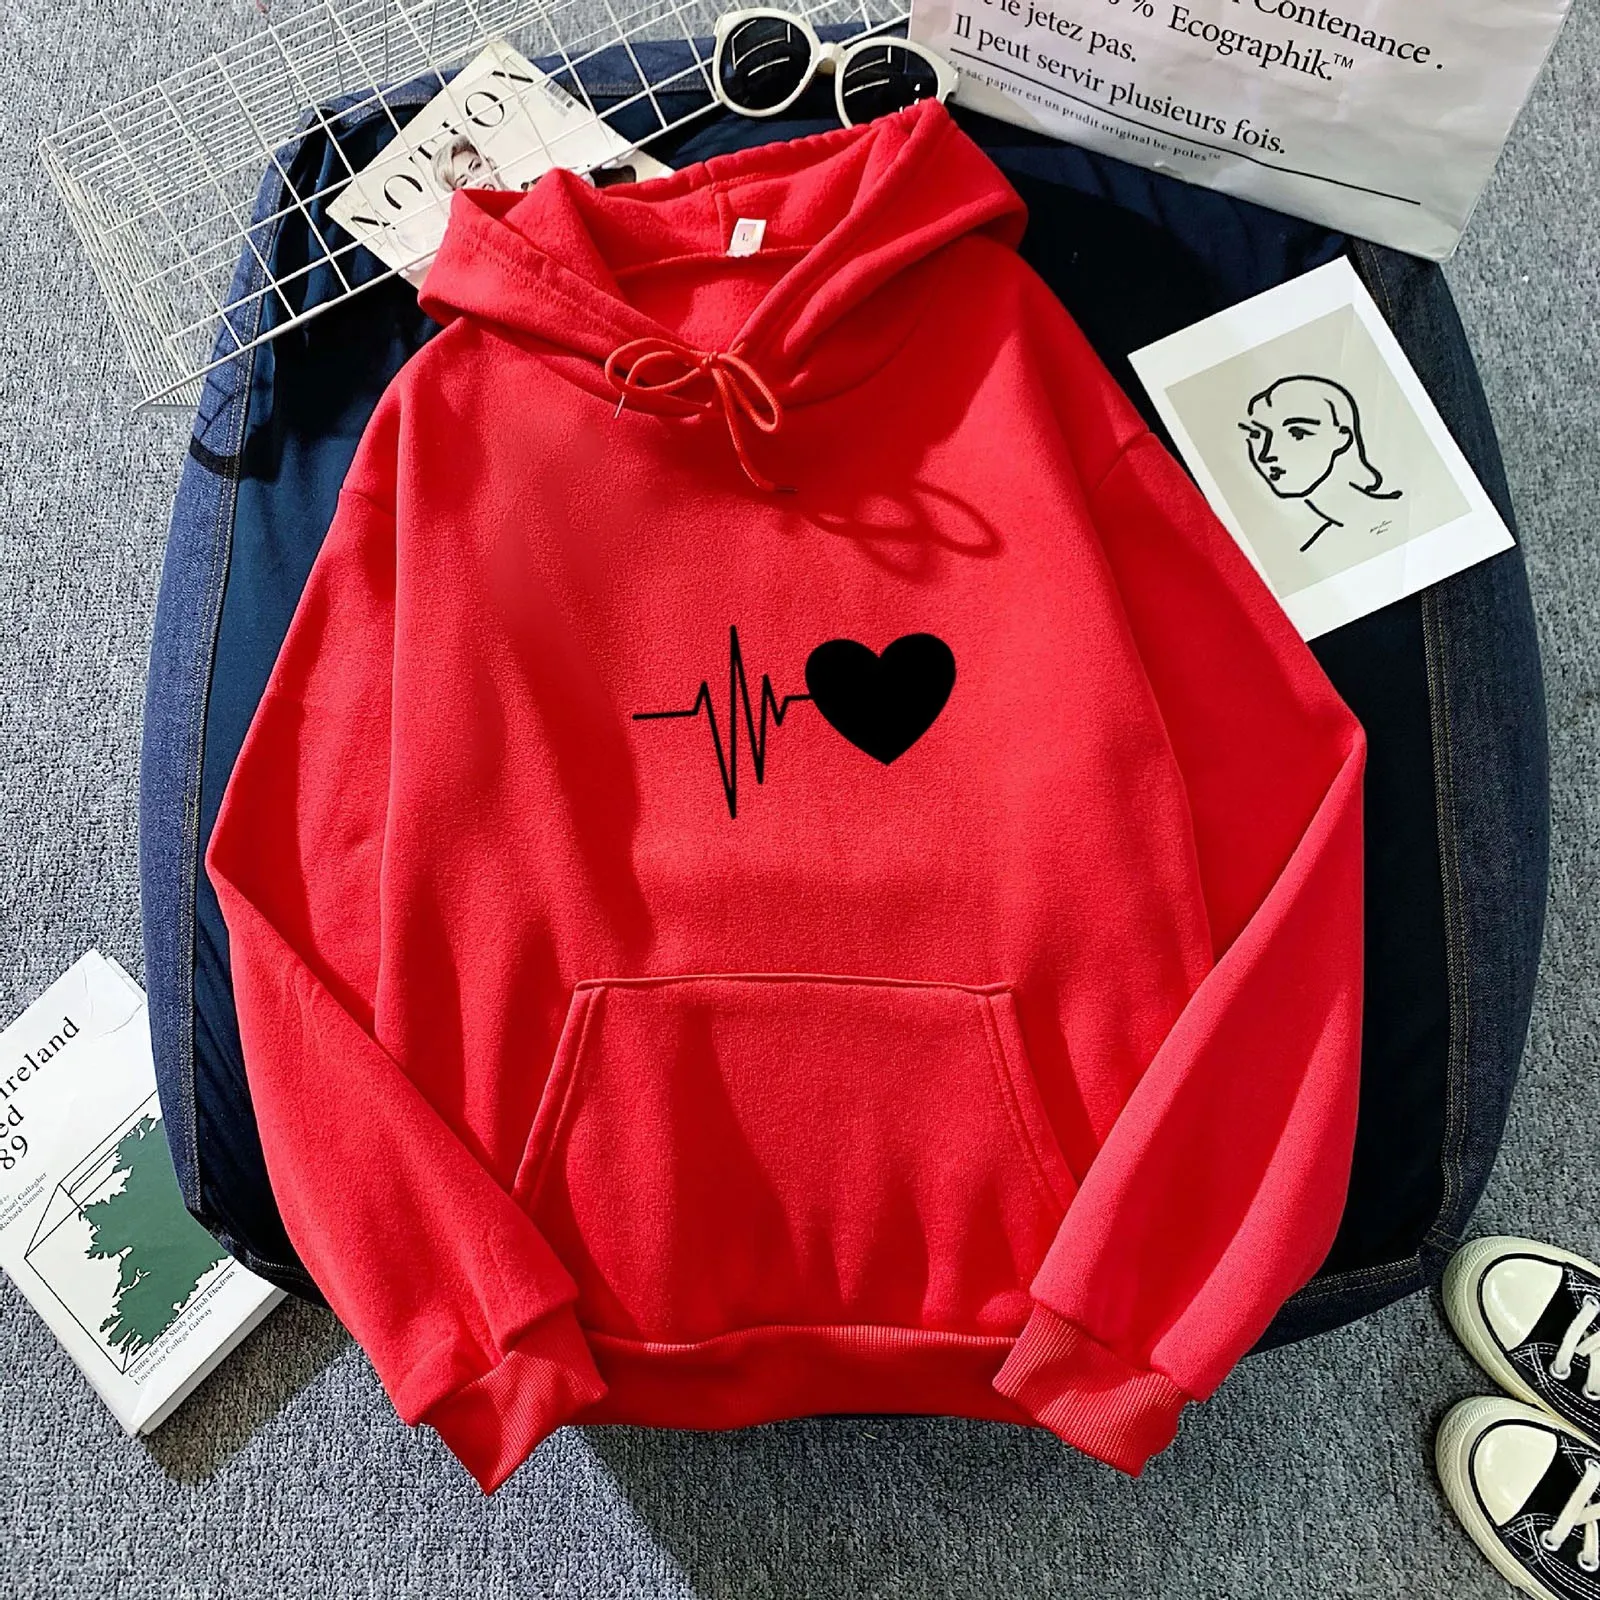 Plus Size Women's Hoodies With Pocket Casual Heart Printing Women Sweetshirts Oversized Hoodie Sudaderas Con Capucha Ropa Mujer pink hoodie